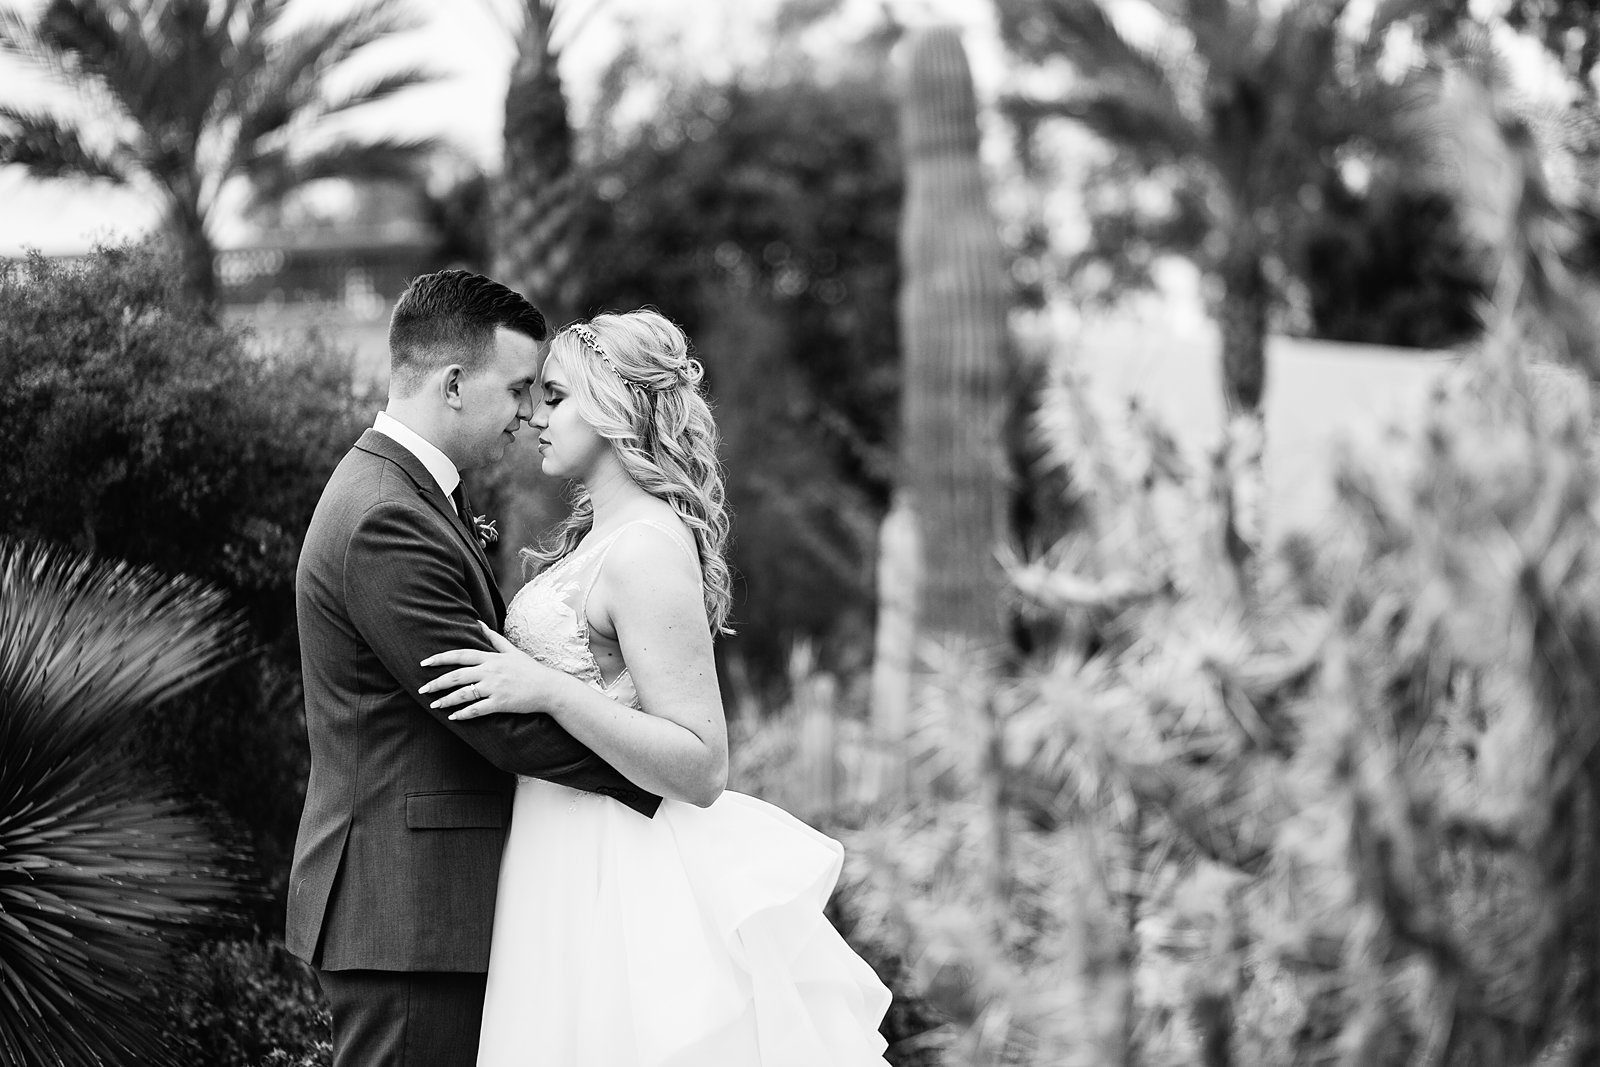 Bride and Groom share an intimate moment at their The Scottsdale Resort at McCormick Ranch wedding by Arizona wedding photographer PMA Photography.